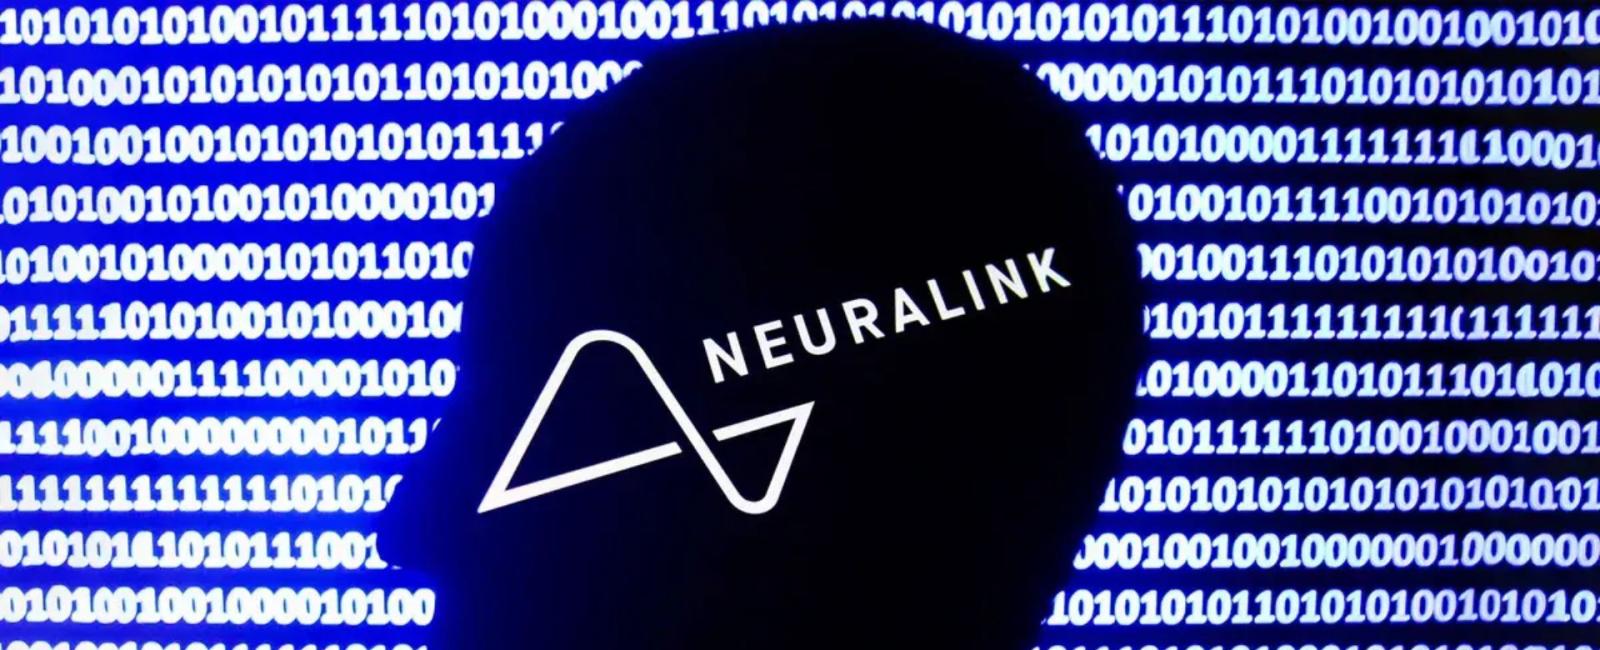 Neuralink will test its chip in in human trials this year says Elon Musk